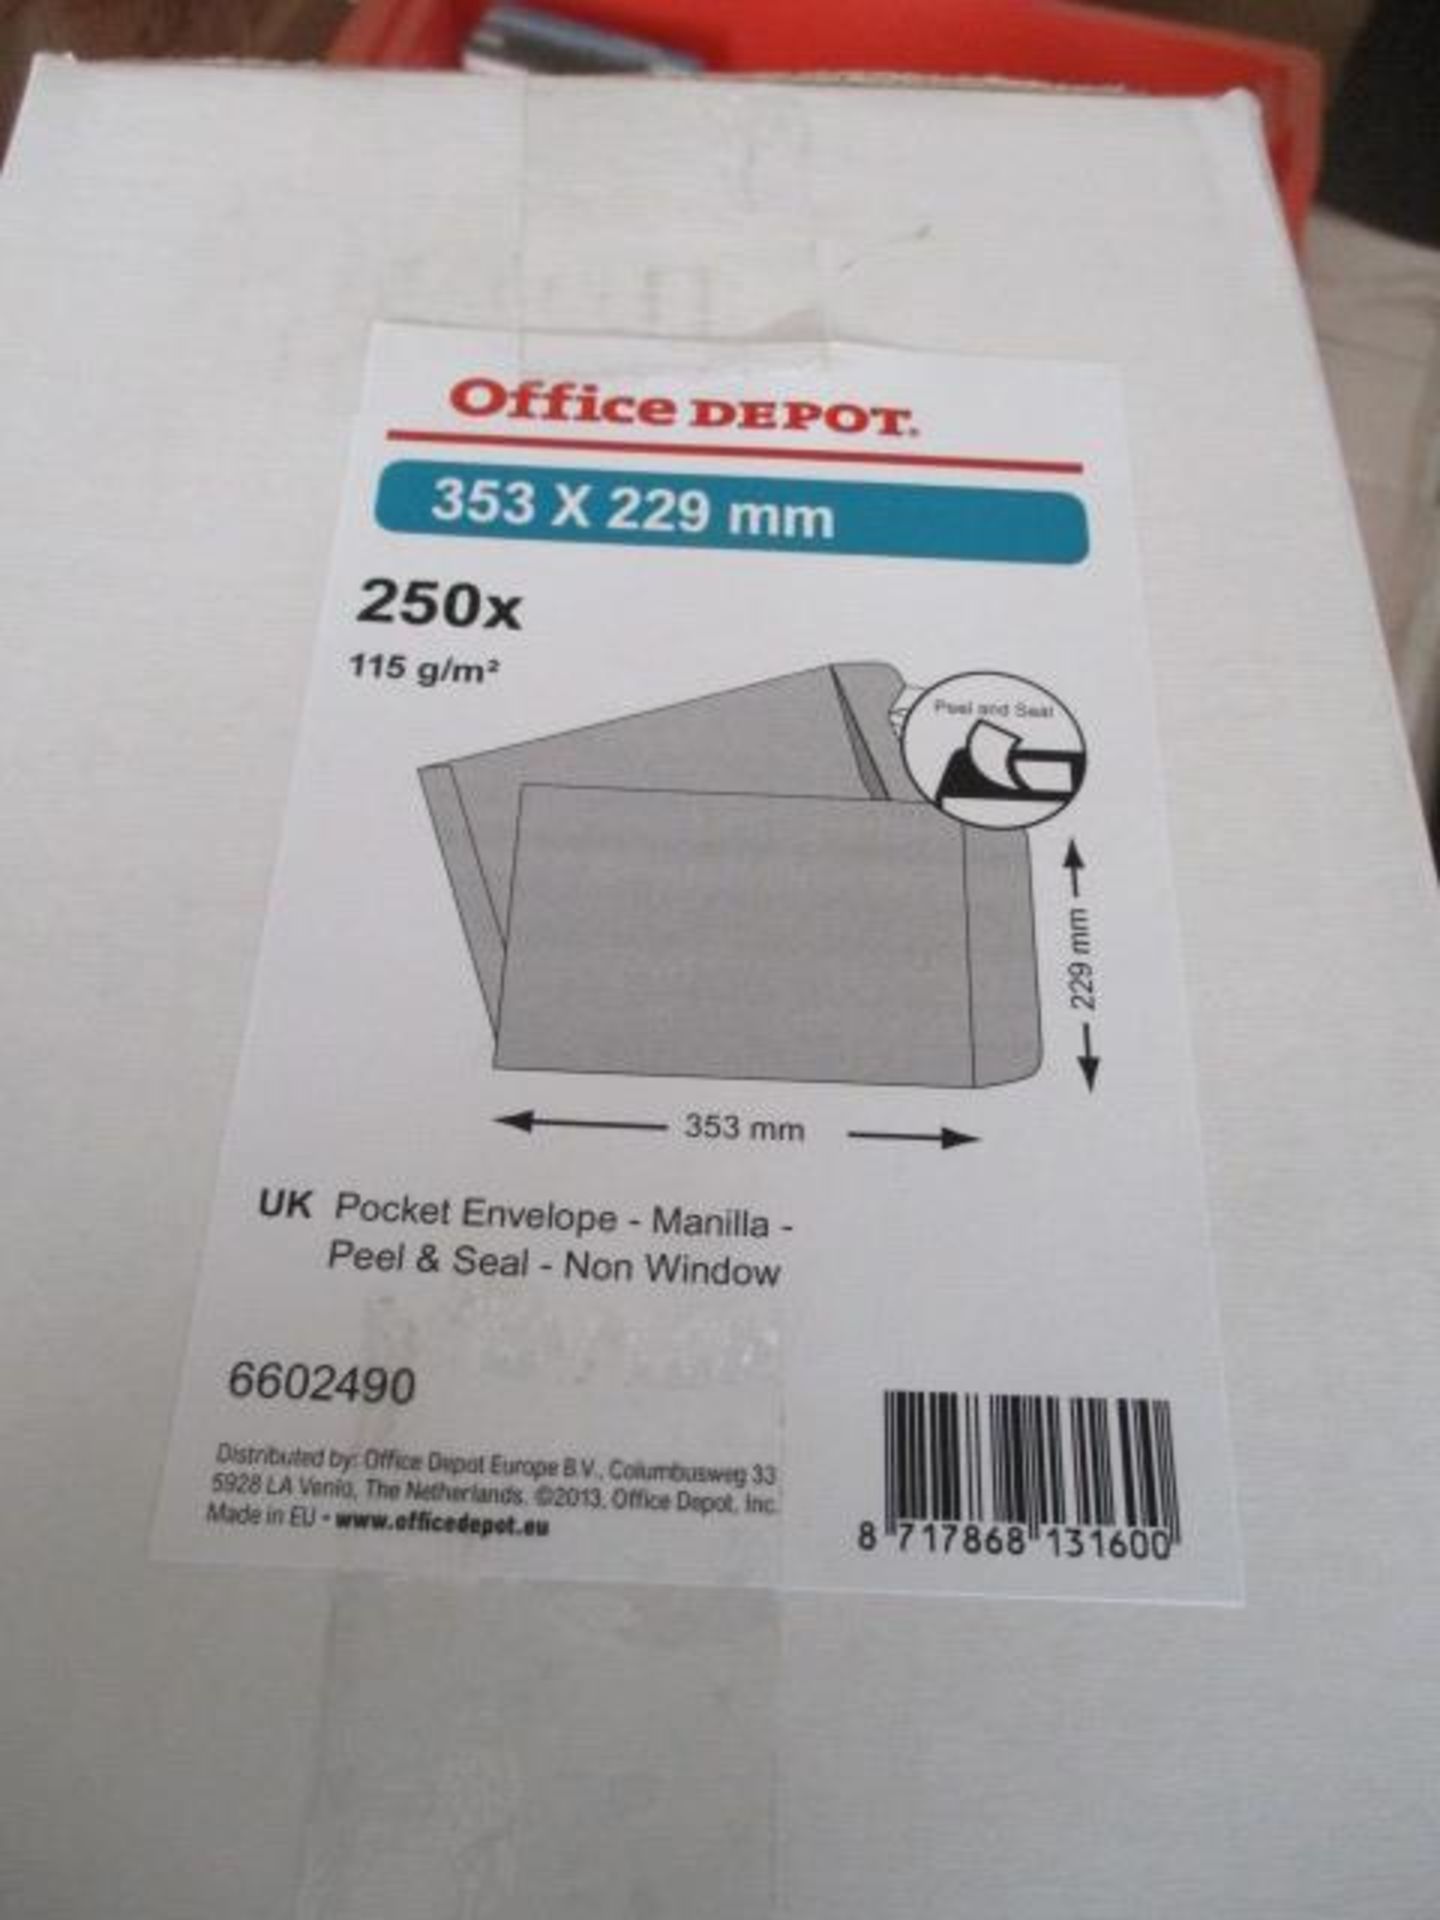 35 Cartons Of Office Direct Envelopes - Large Size A4 - Image 2 of 2